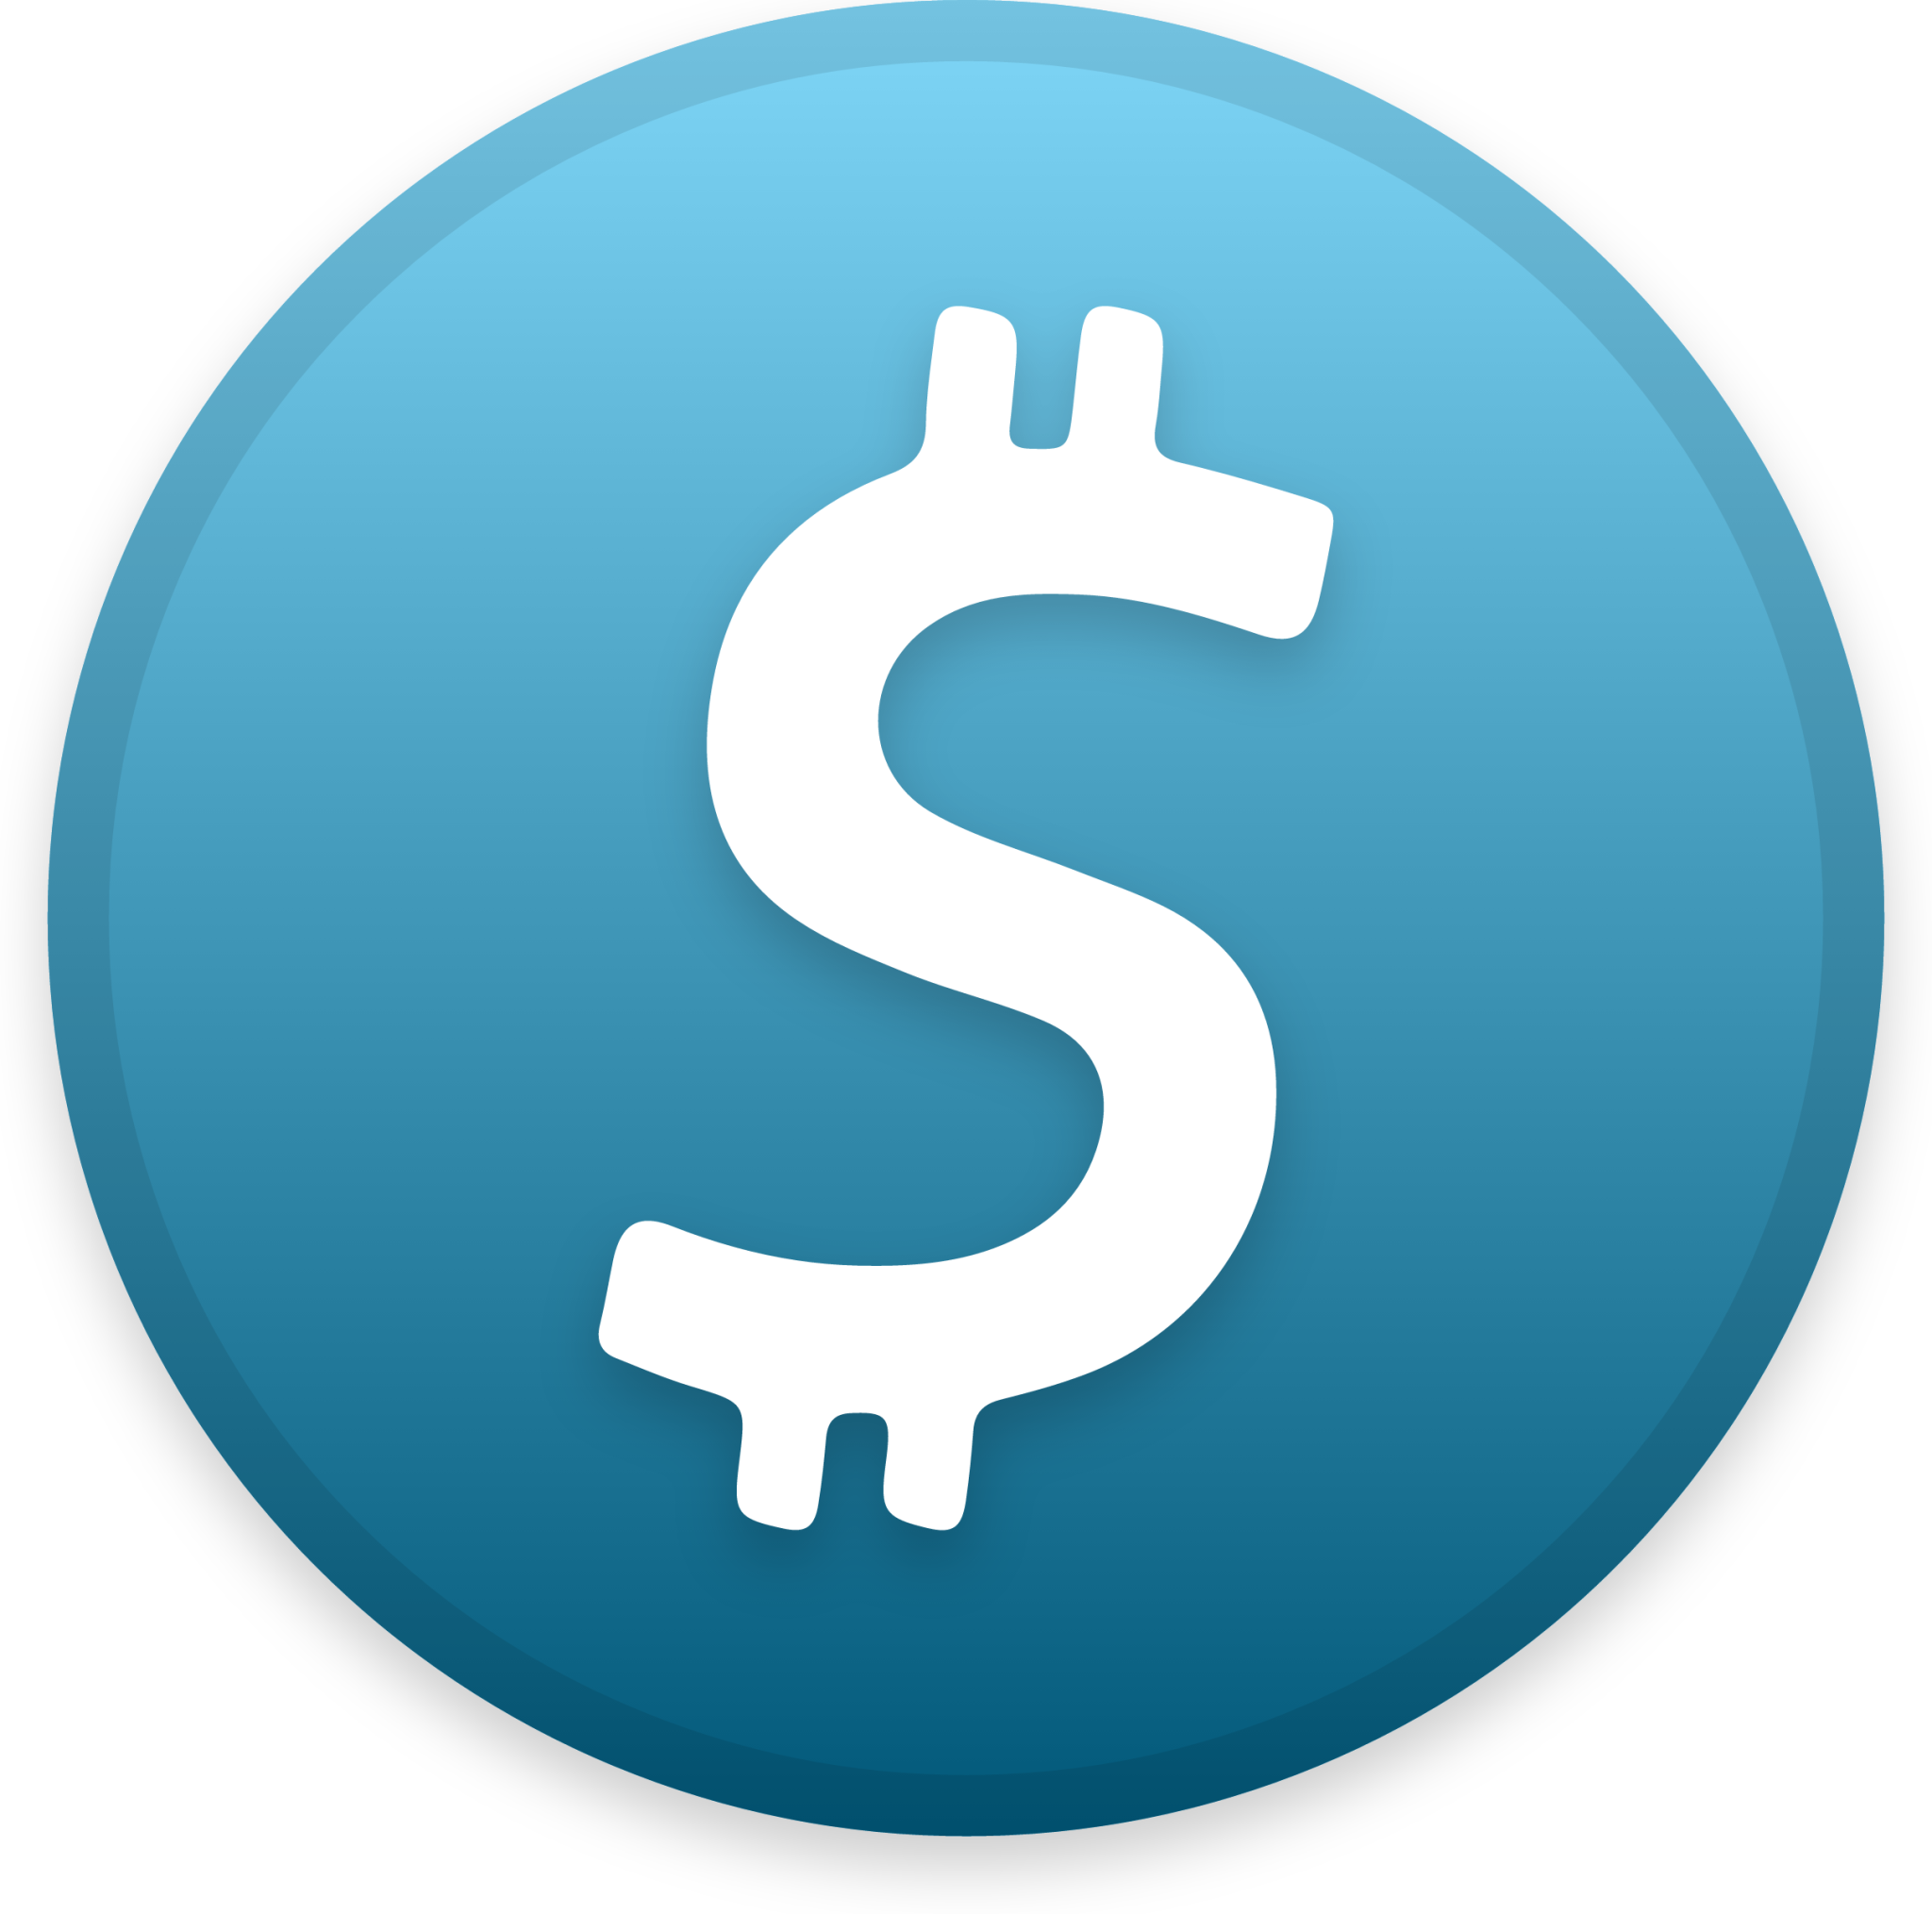 Startcoin Cryptocurrency icon